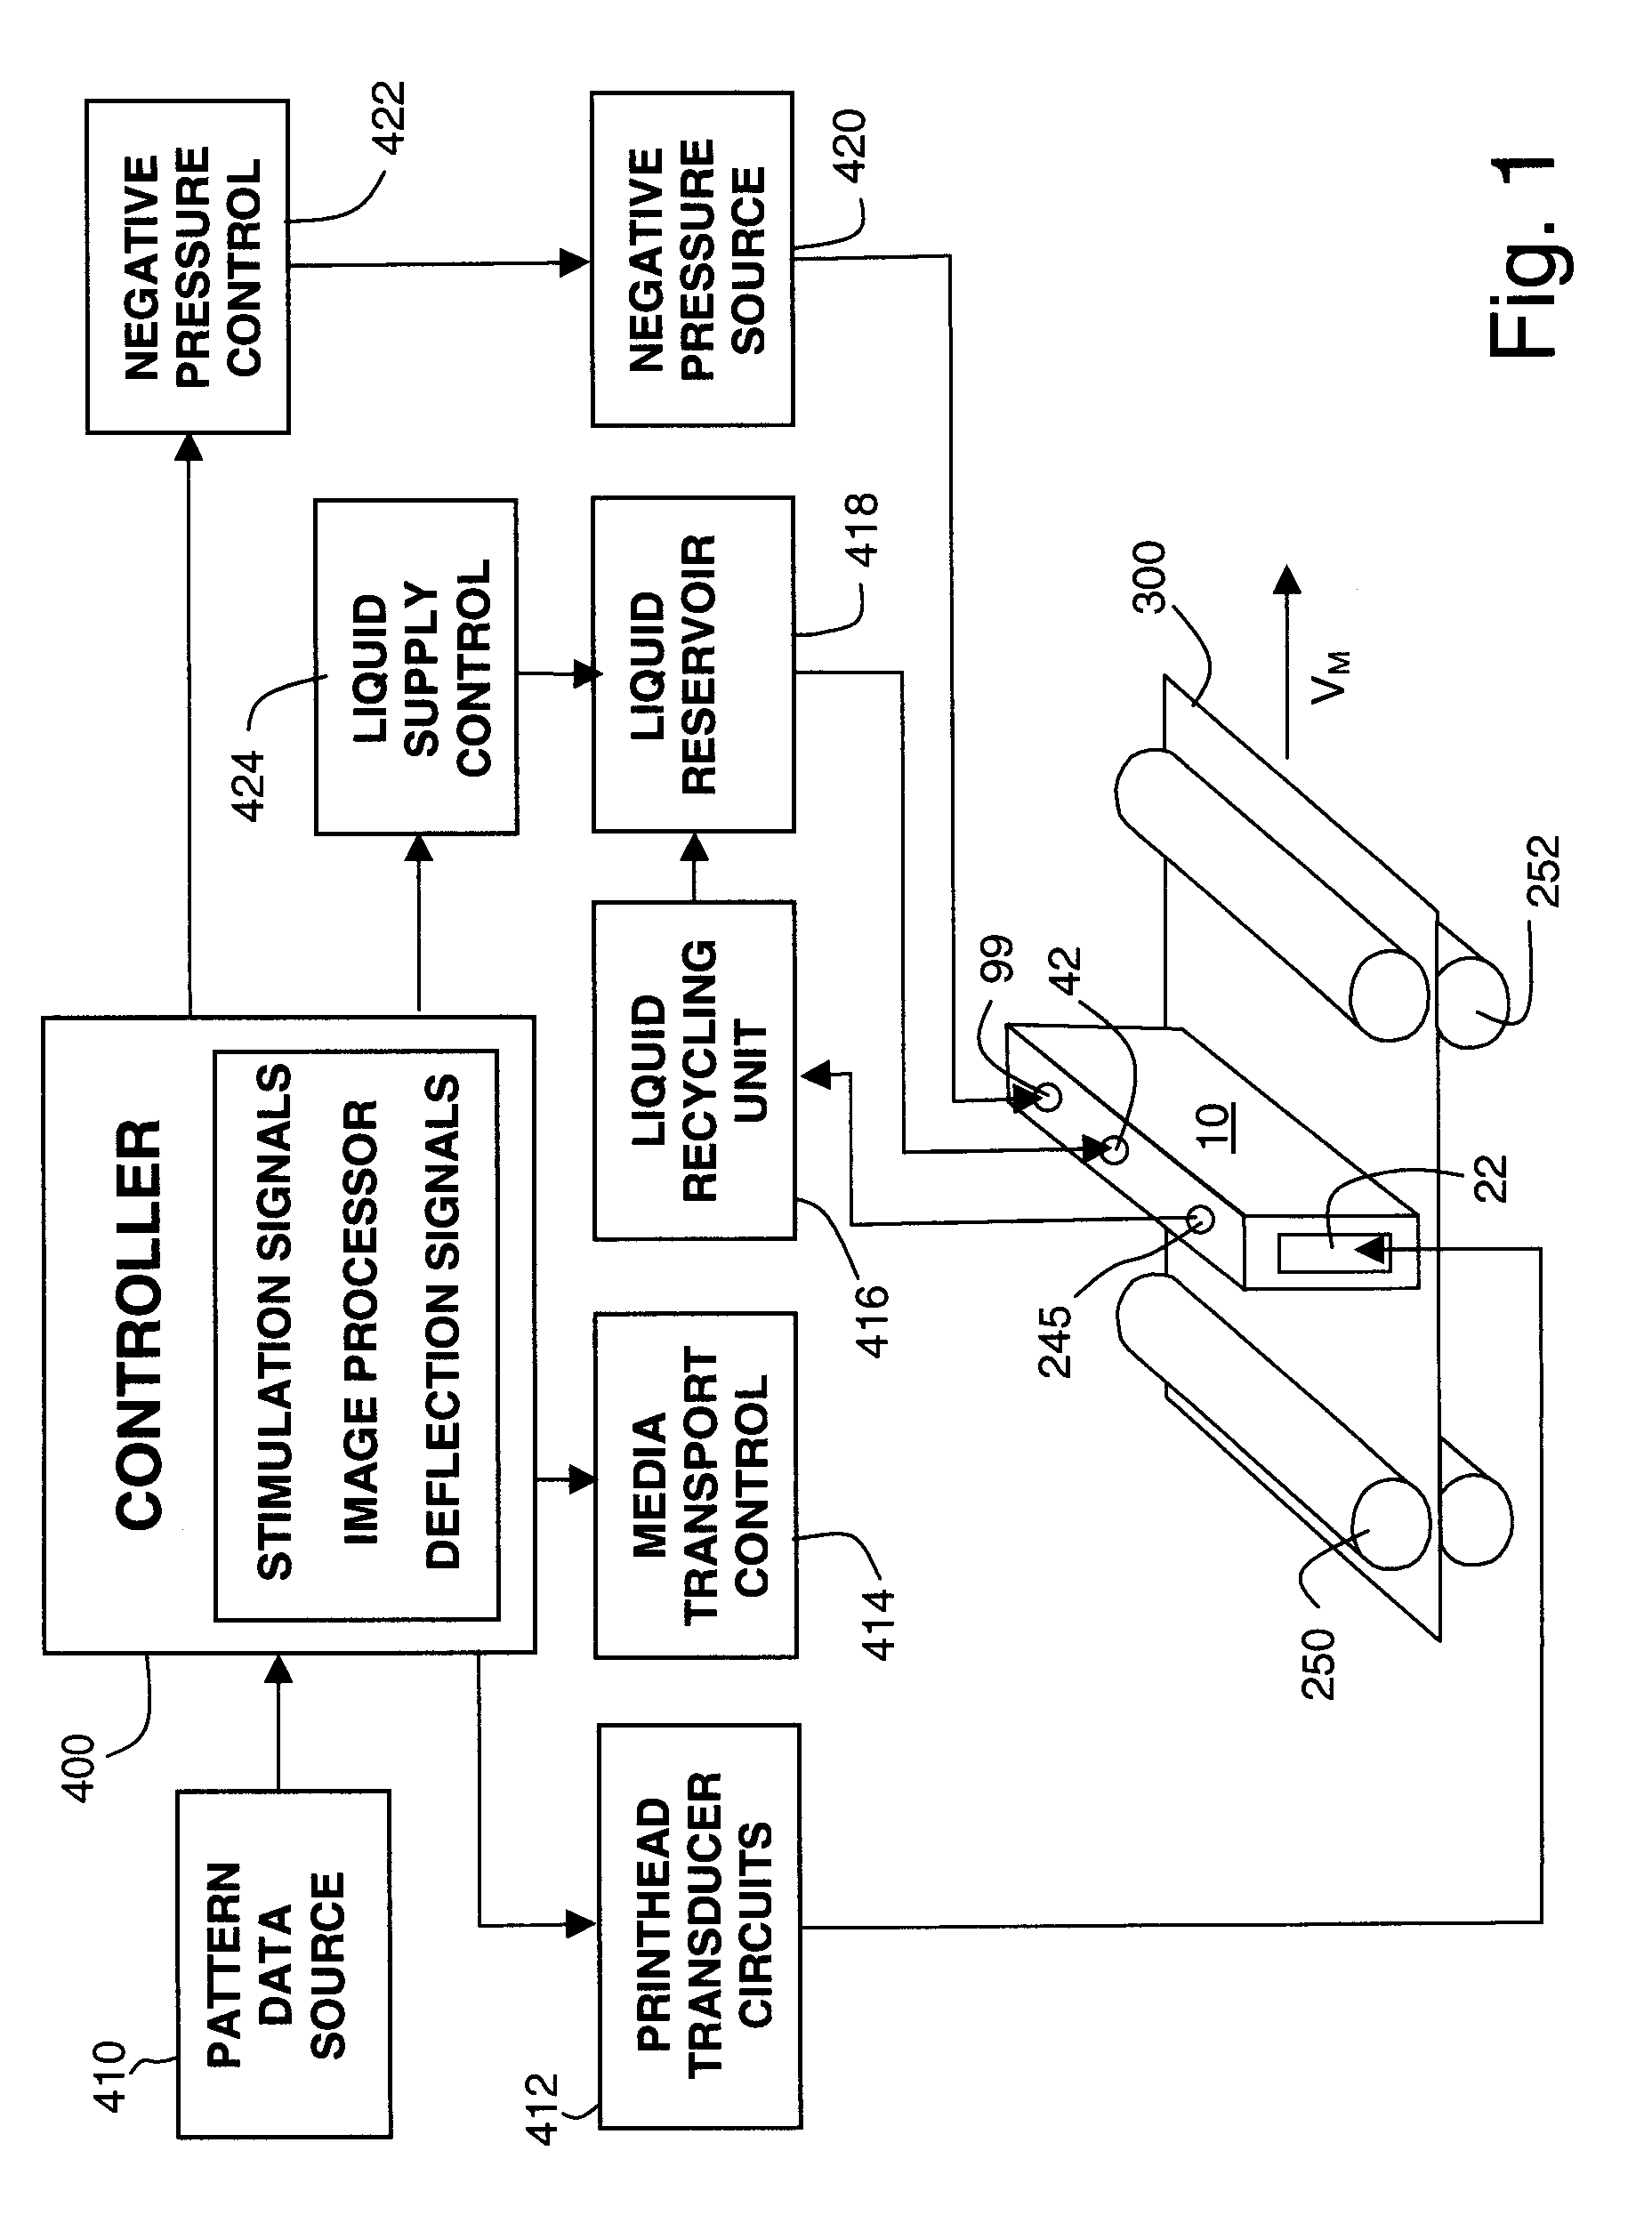 Continuous drop emitter with reduced stimulation crosstalk